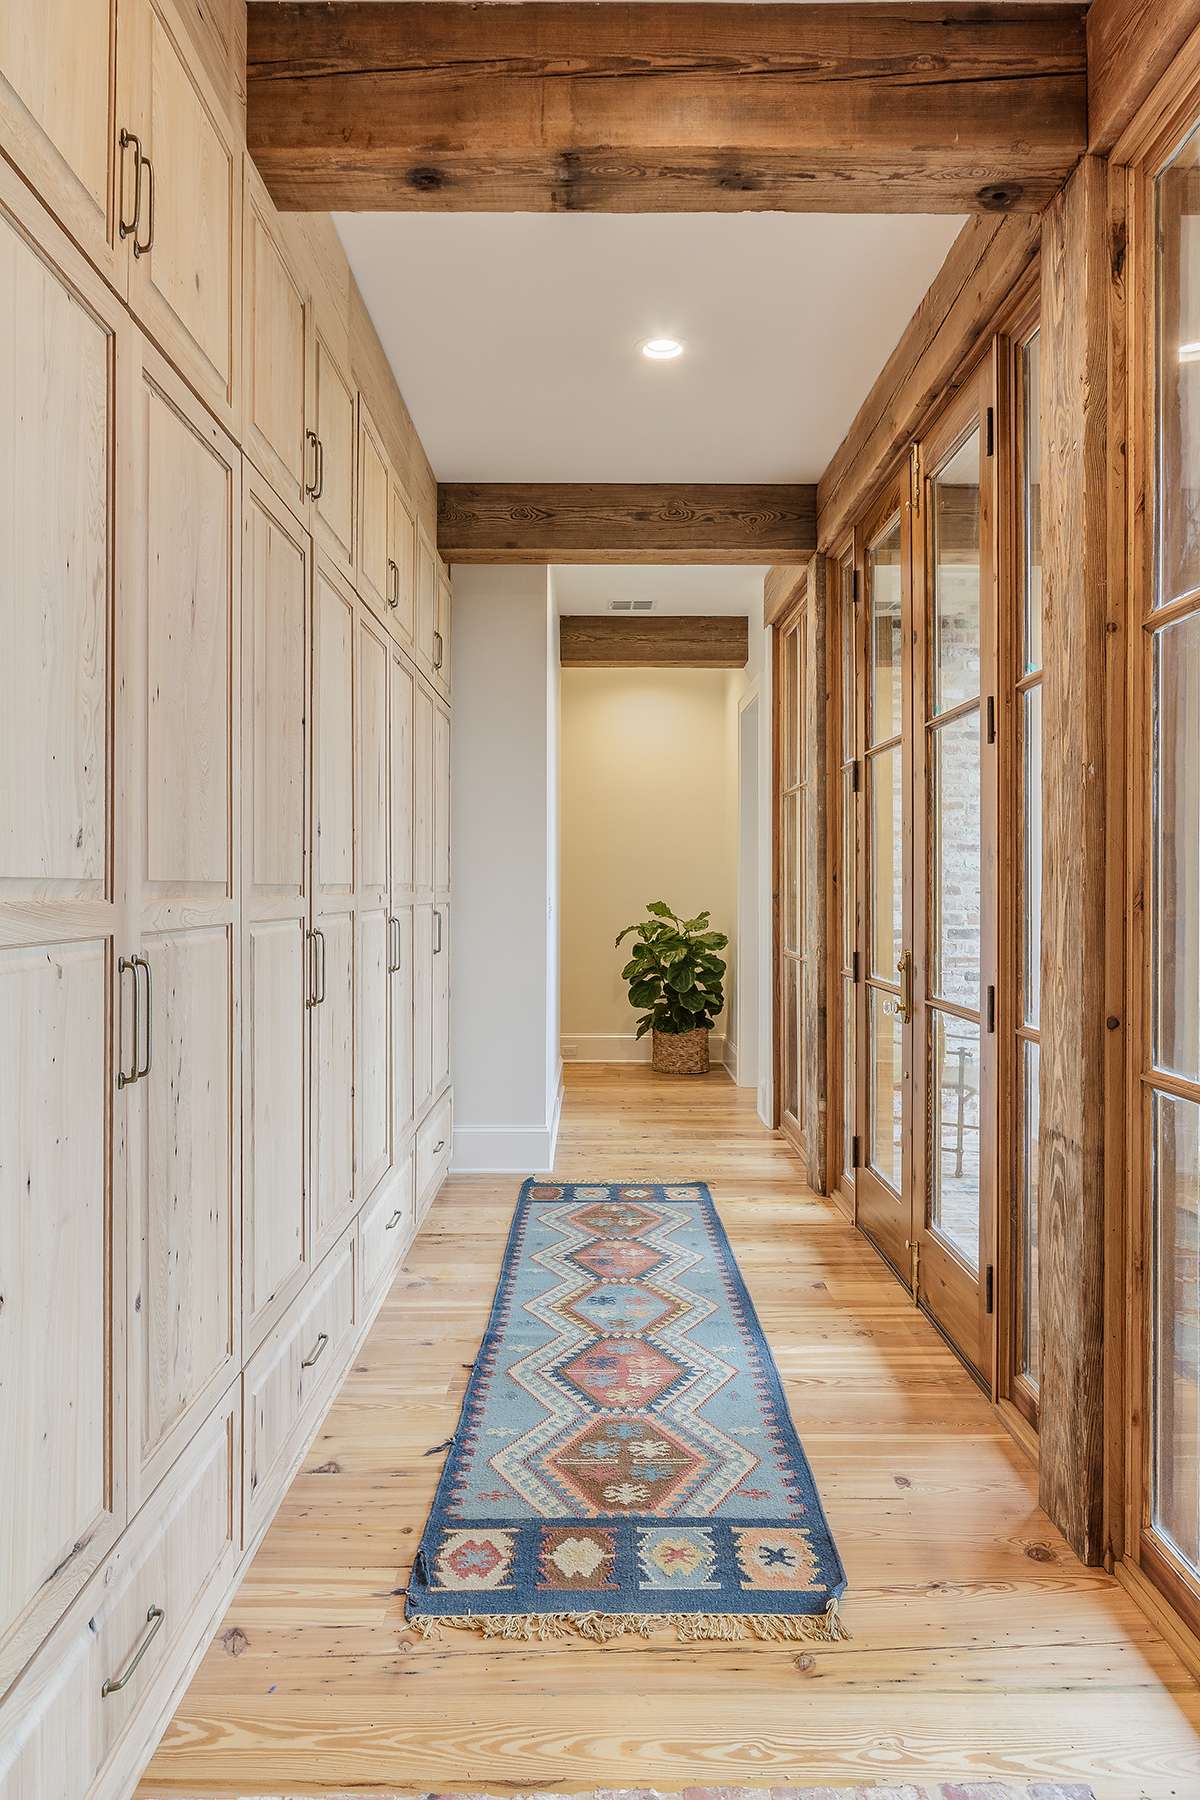 Interior view of the hallway at Louisiana Rustic, a custom home designed and built by Farmer Payne Architects.